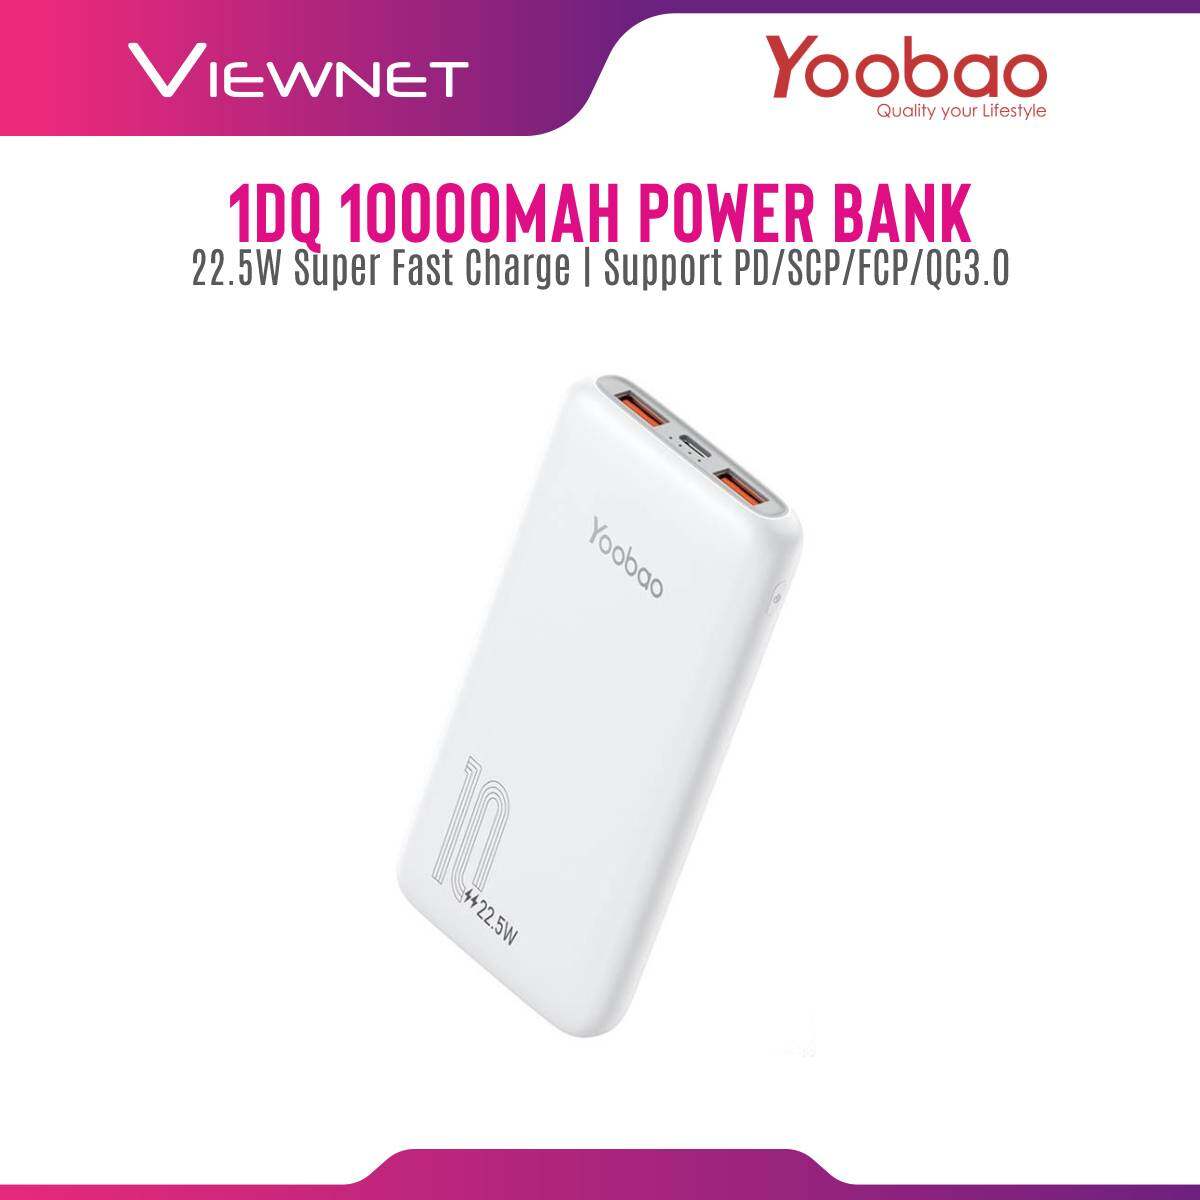 Yoobao D10Q 10000mAh 22.5W Super Fast Charge Slim Power Bank Support PD/SCP/FCP/QC3.0 with Dual Output